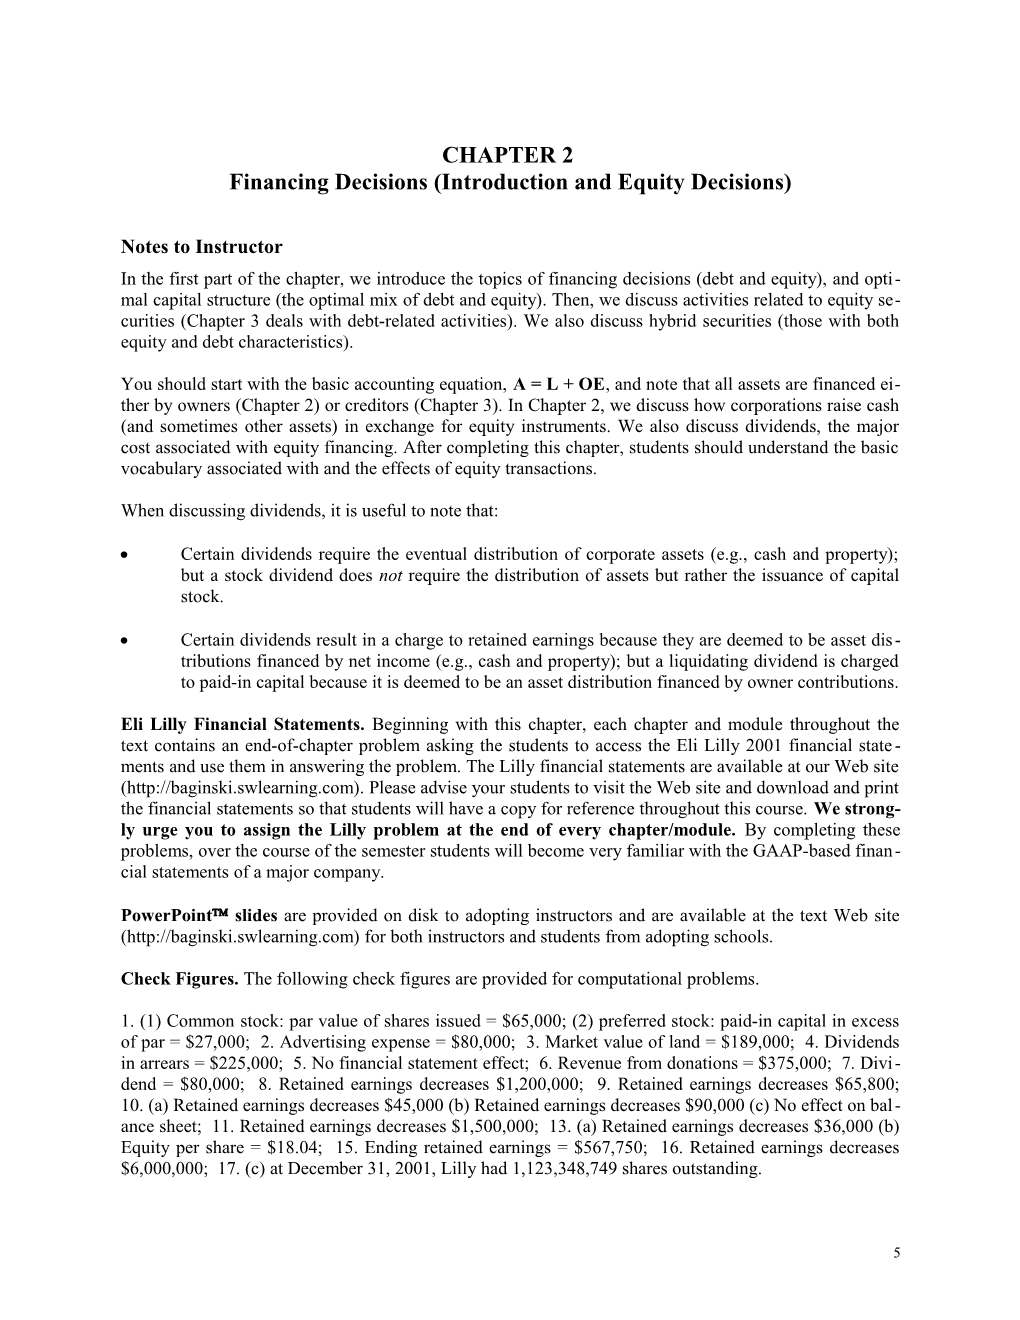 Chapter 2: Financing Decisions (Introduction and Equity Decisions)